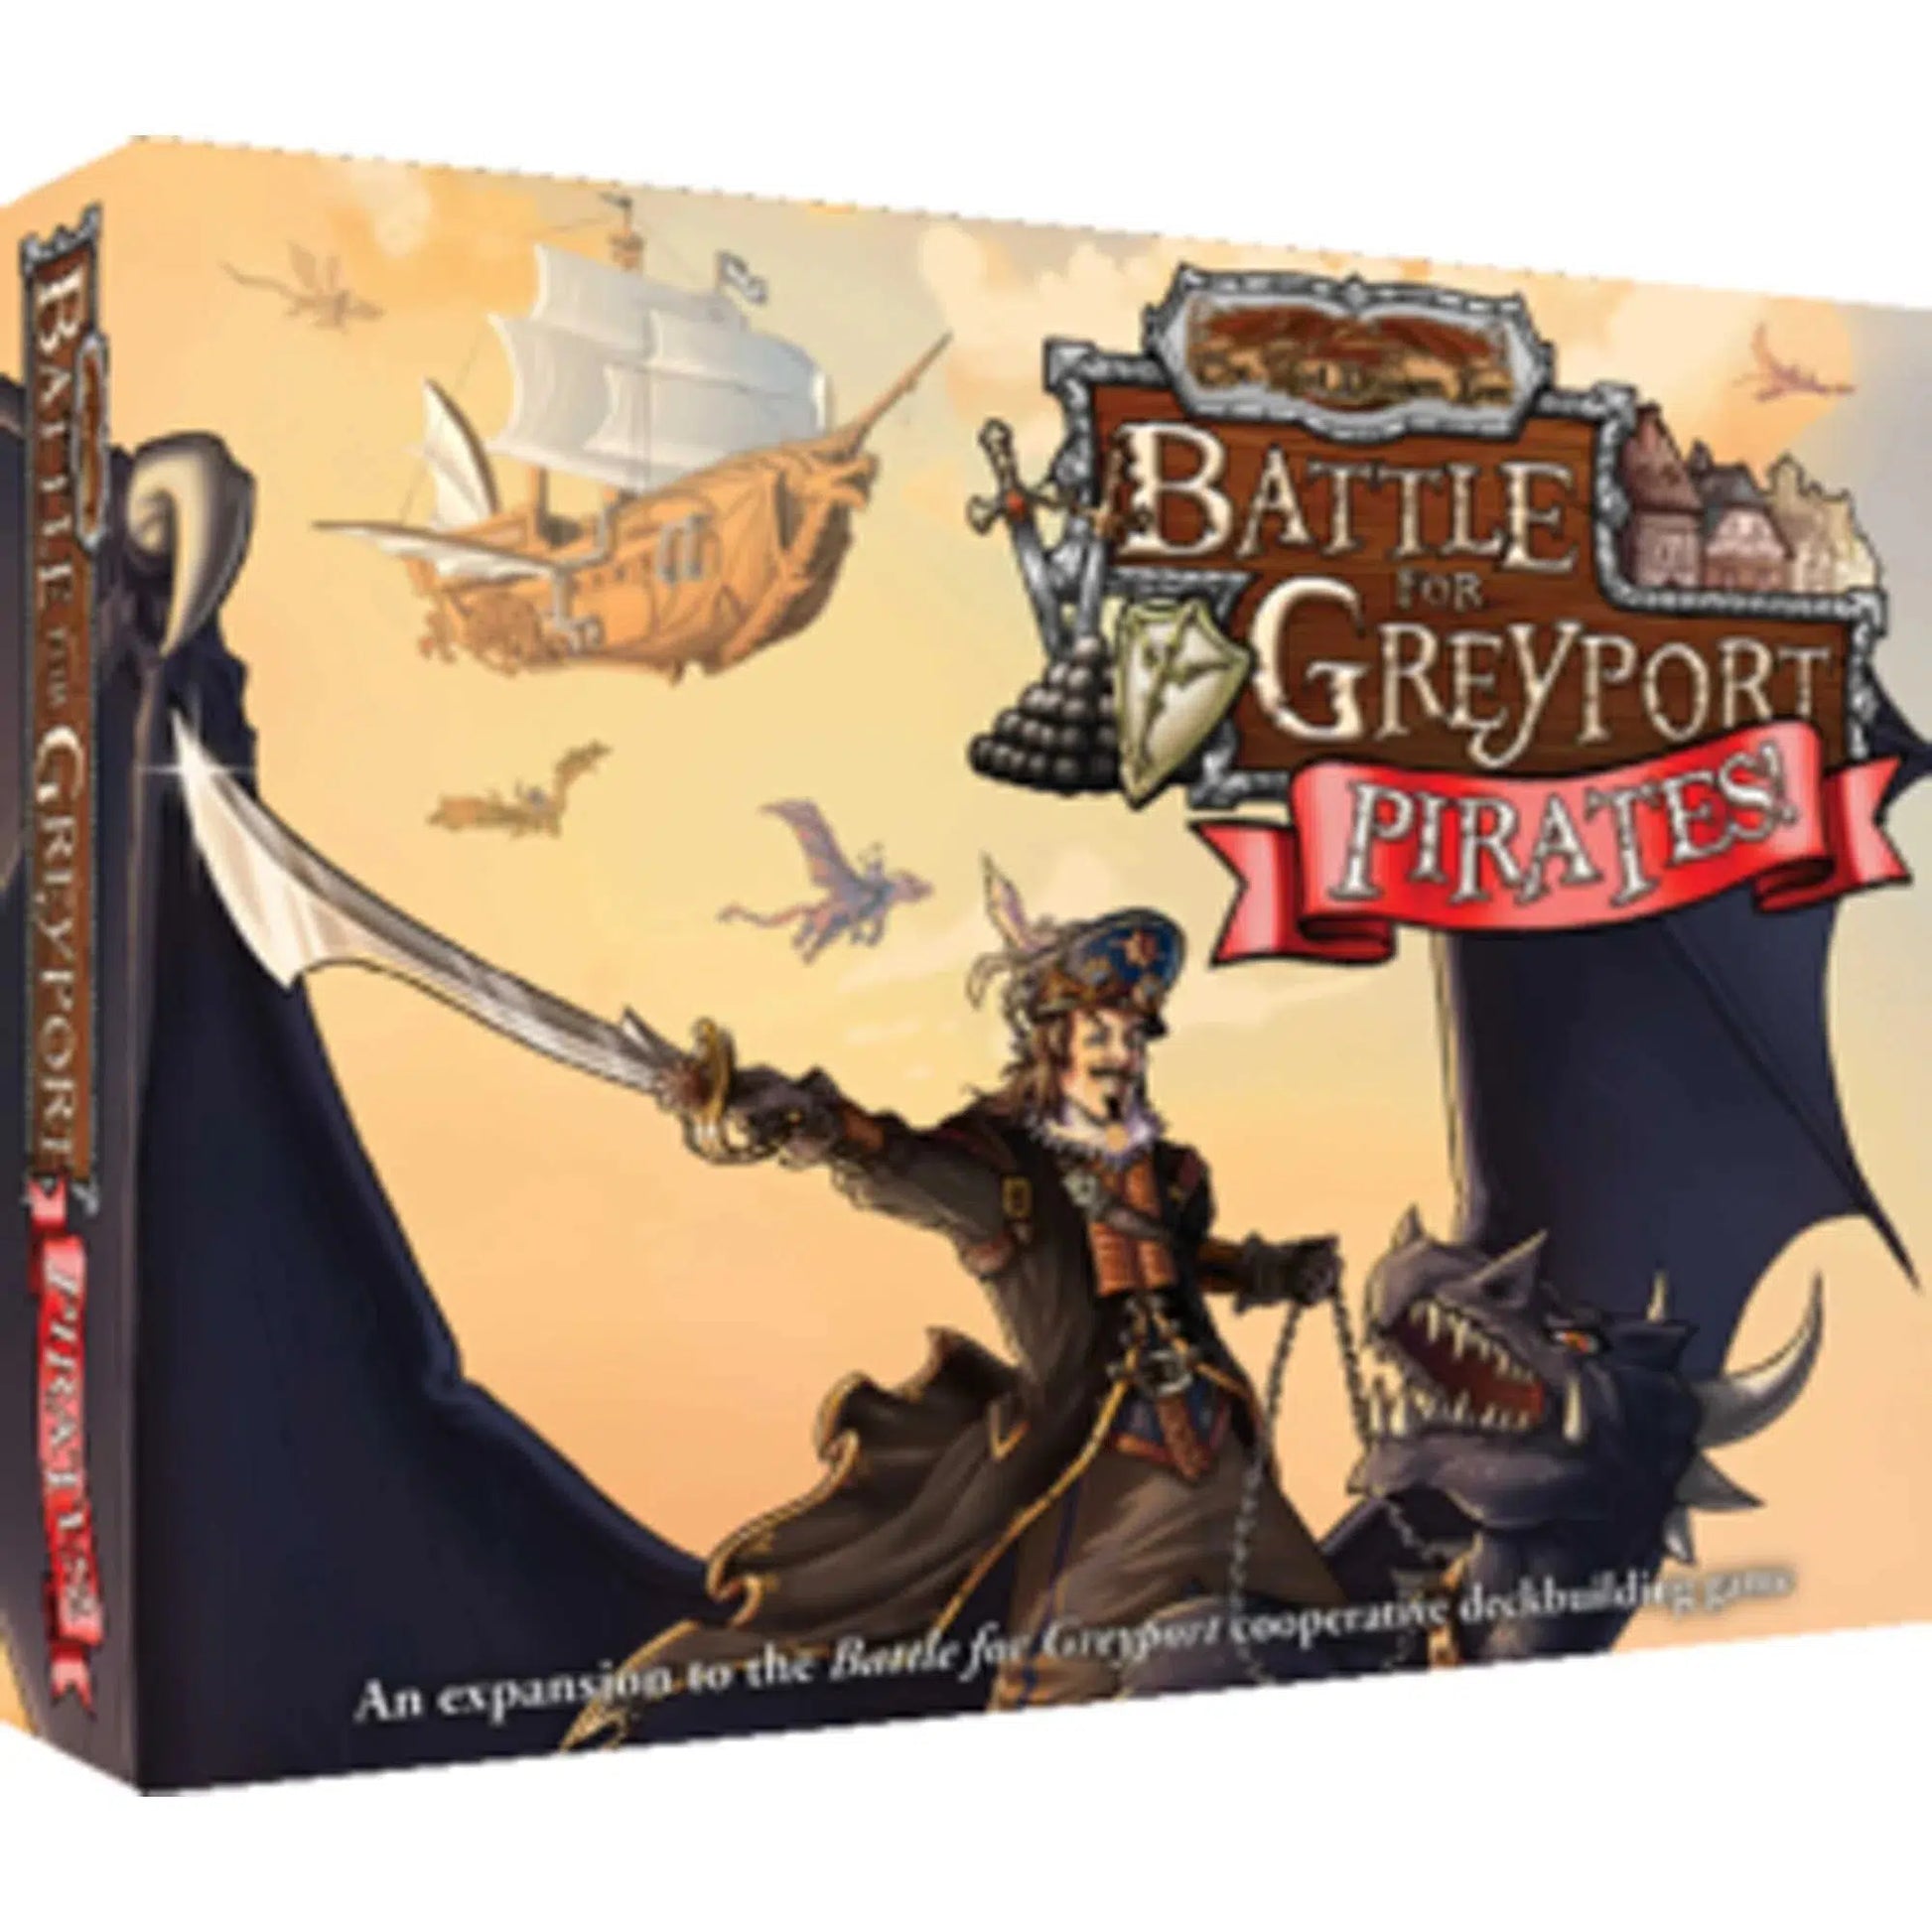 The Red Dragon Inn: Battle for Greyport – Pirates!